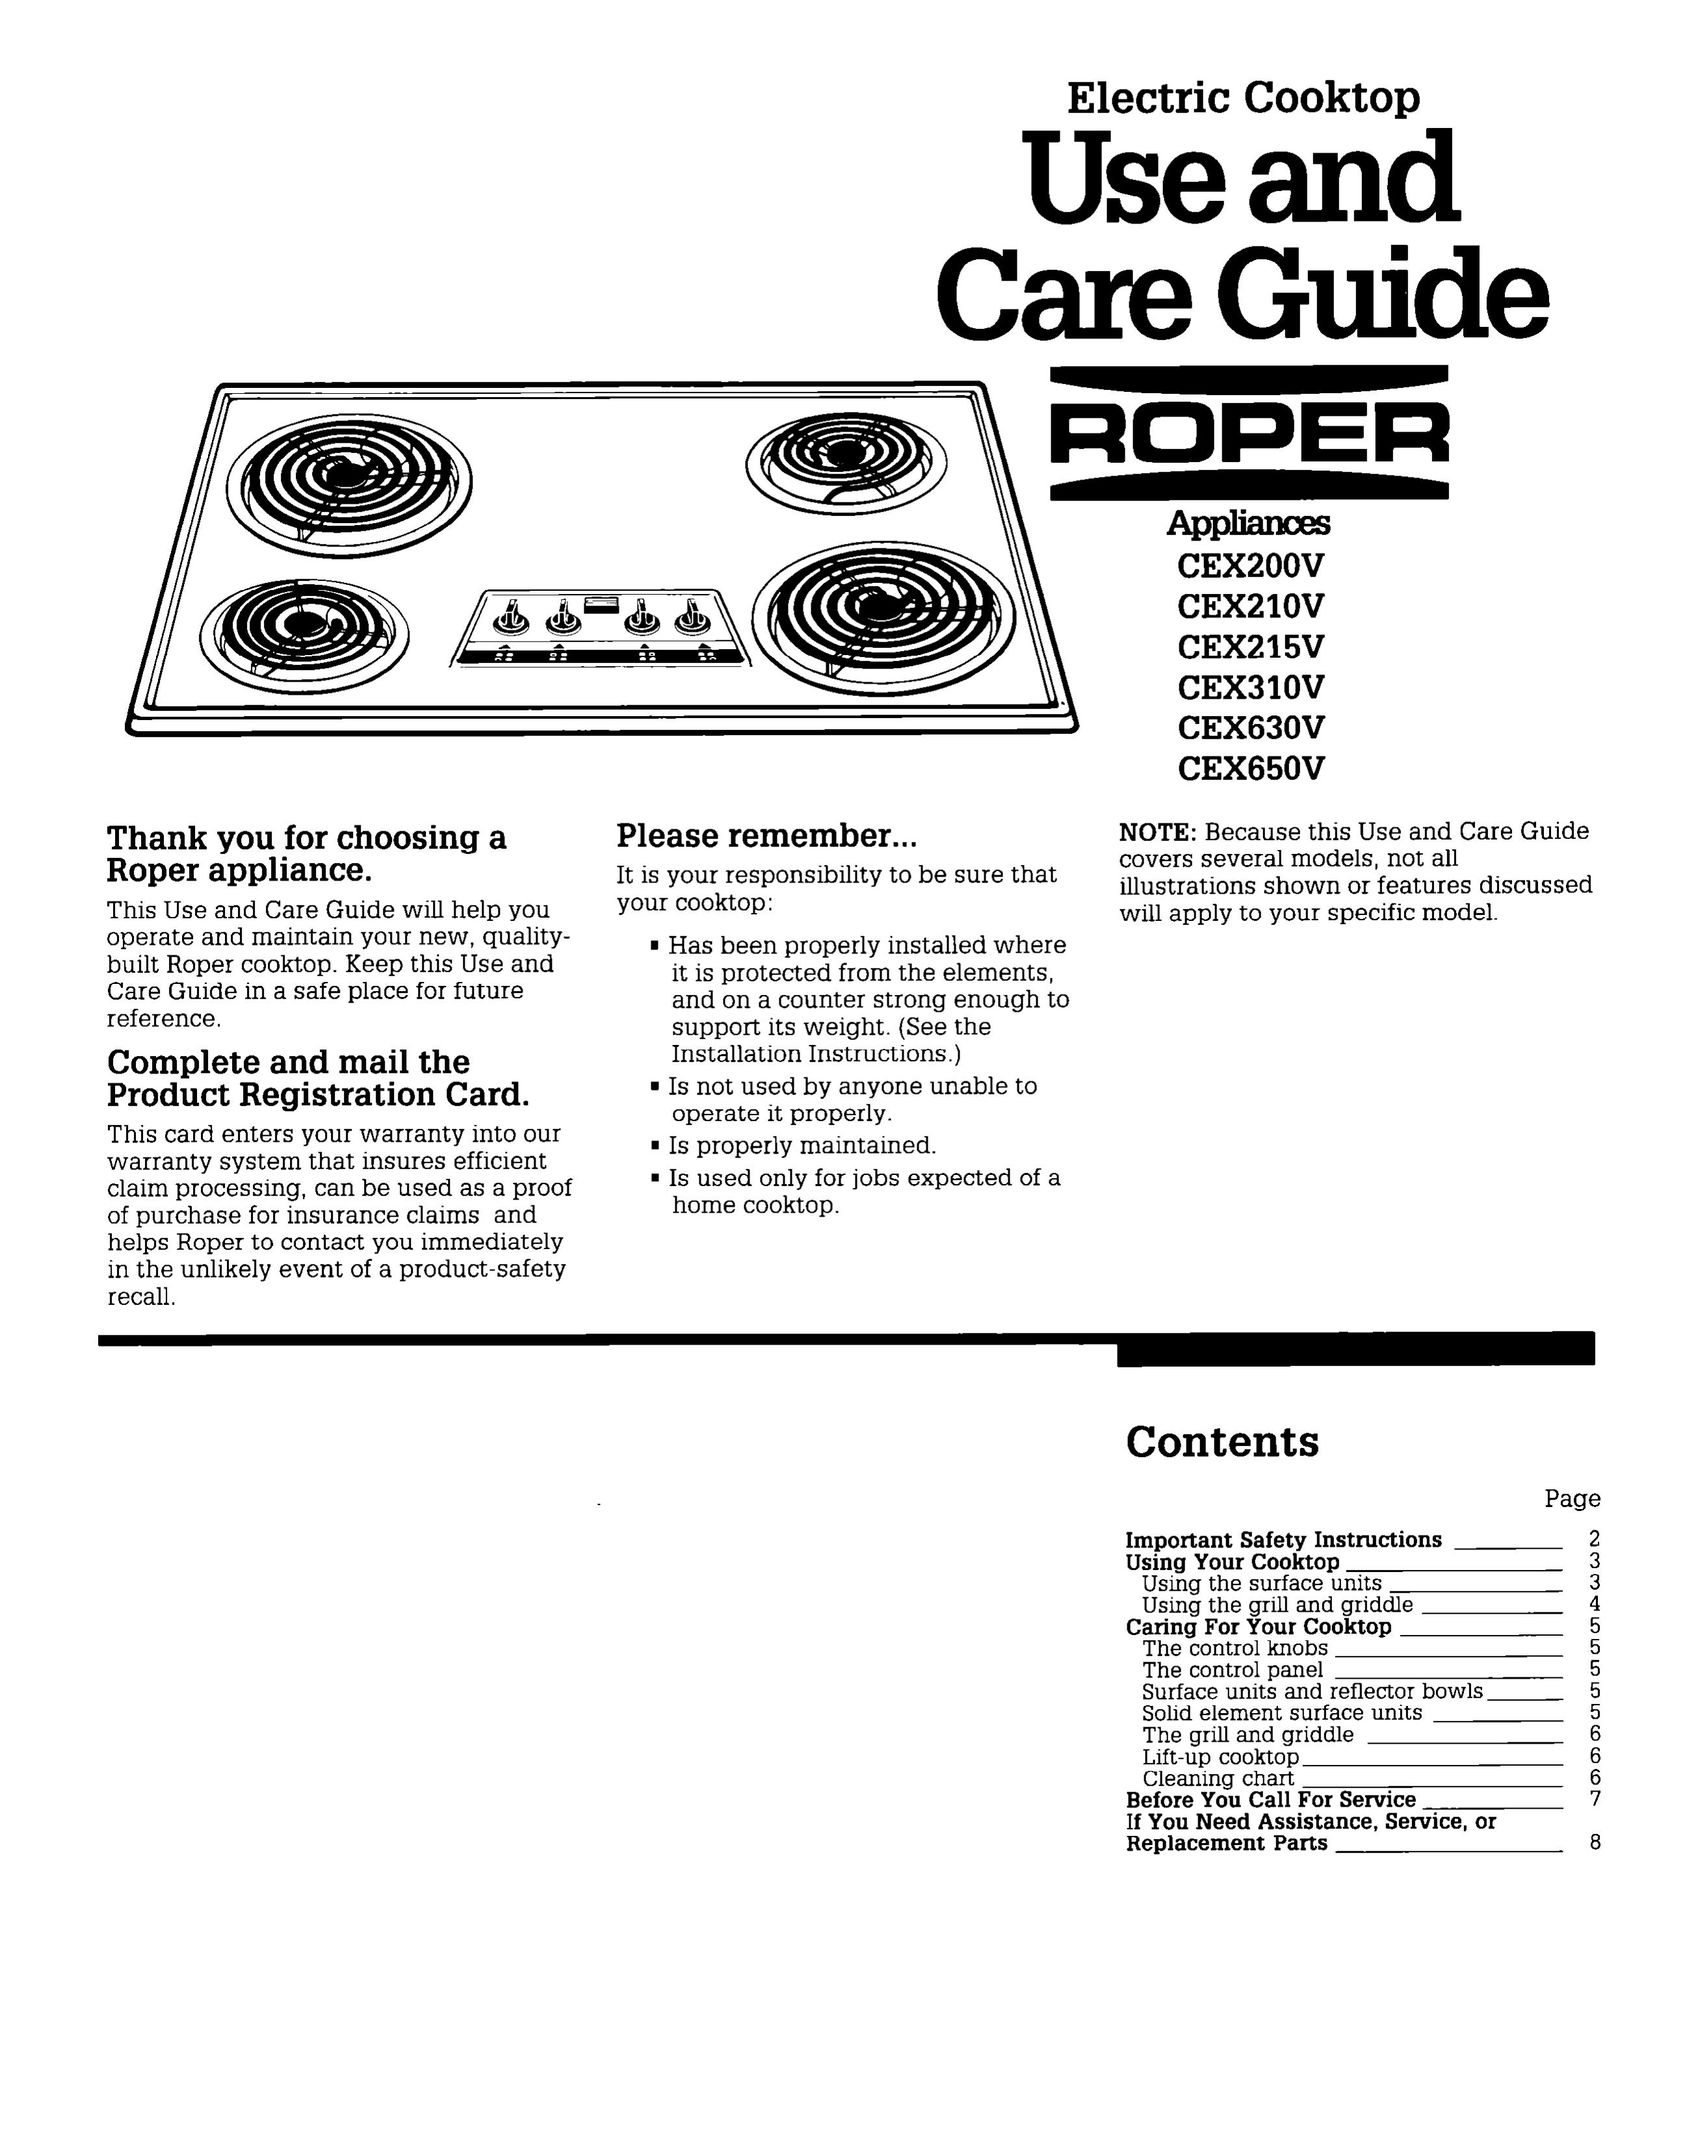 Whirlpool CEX310V Cooktop User Manual